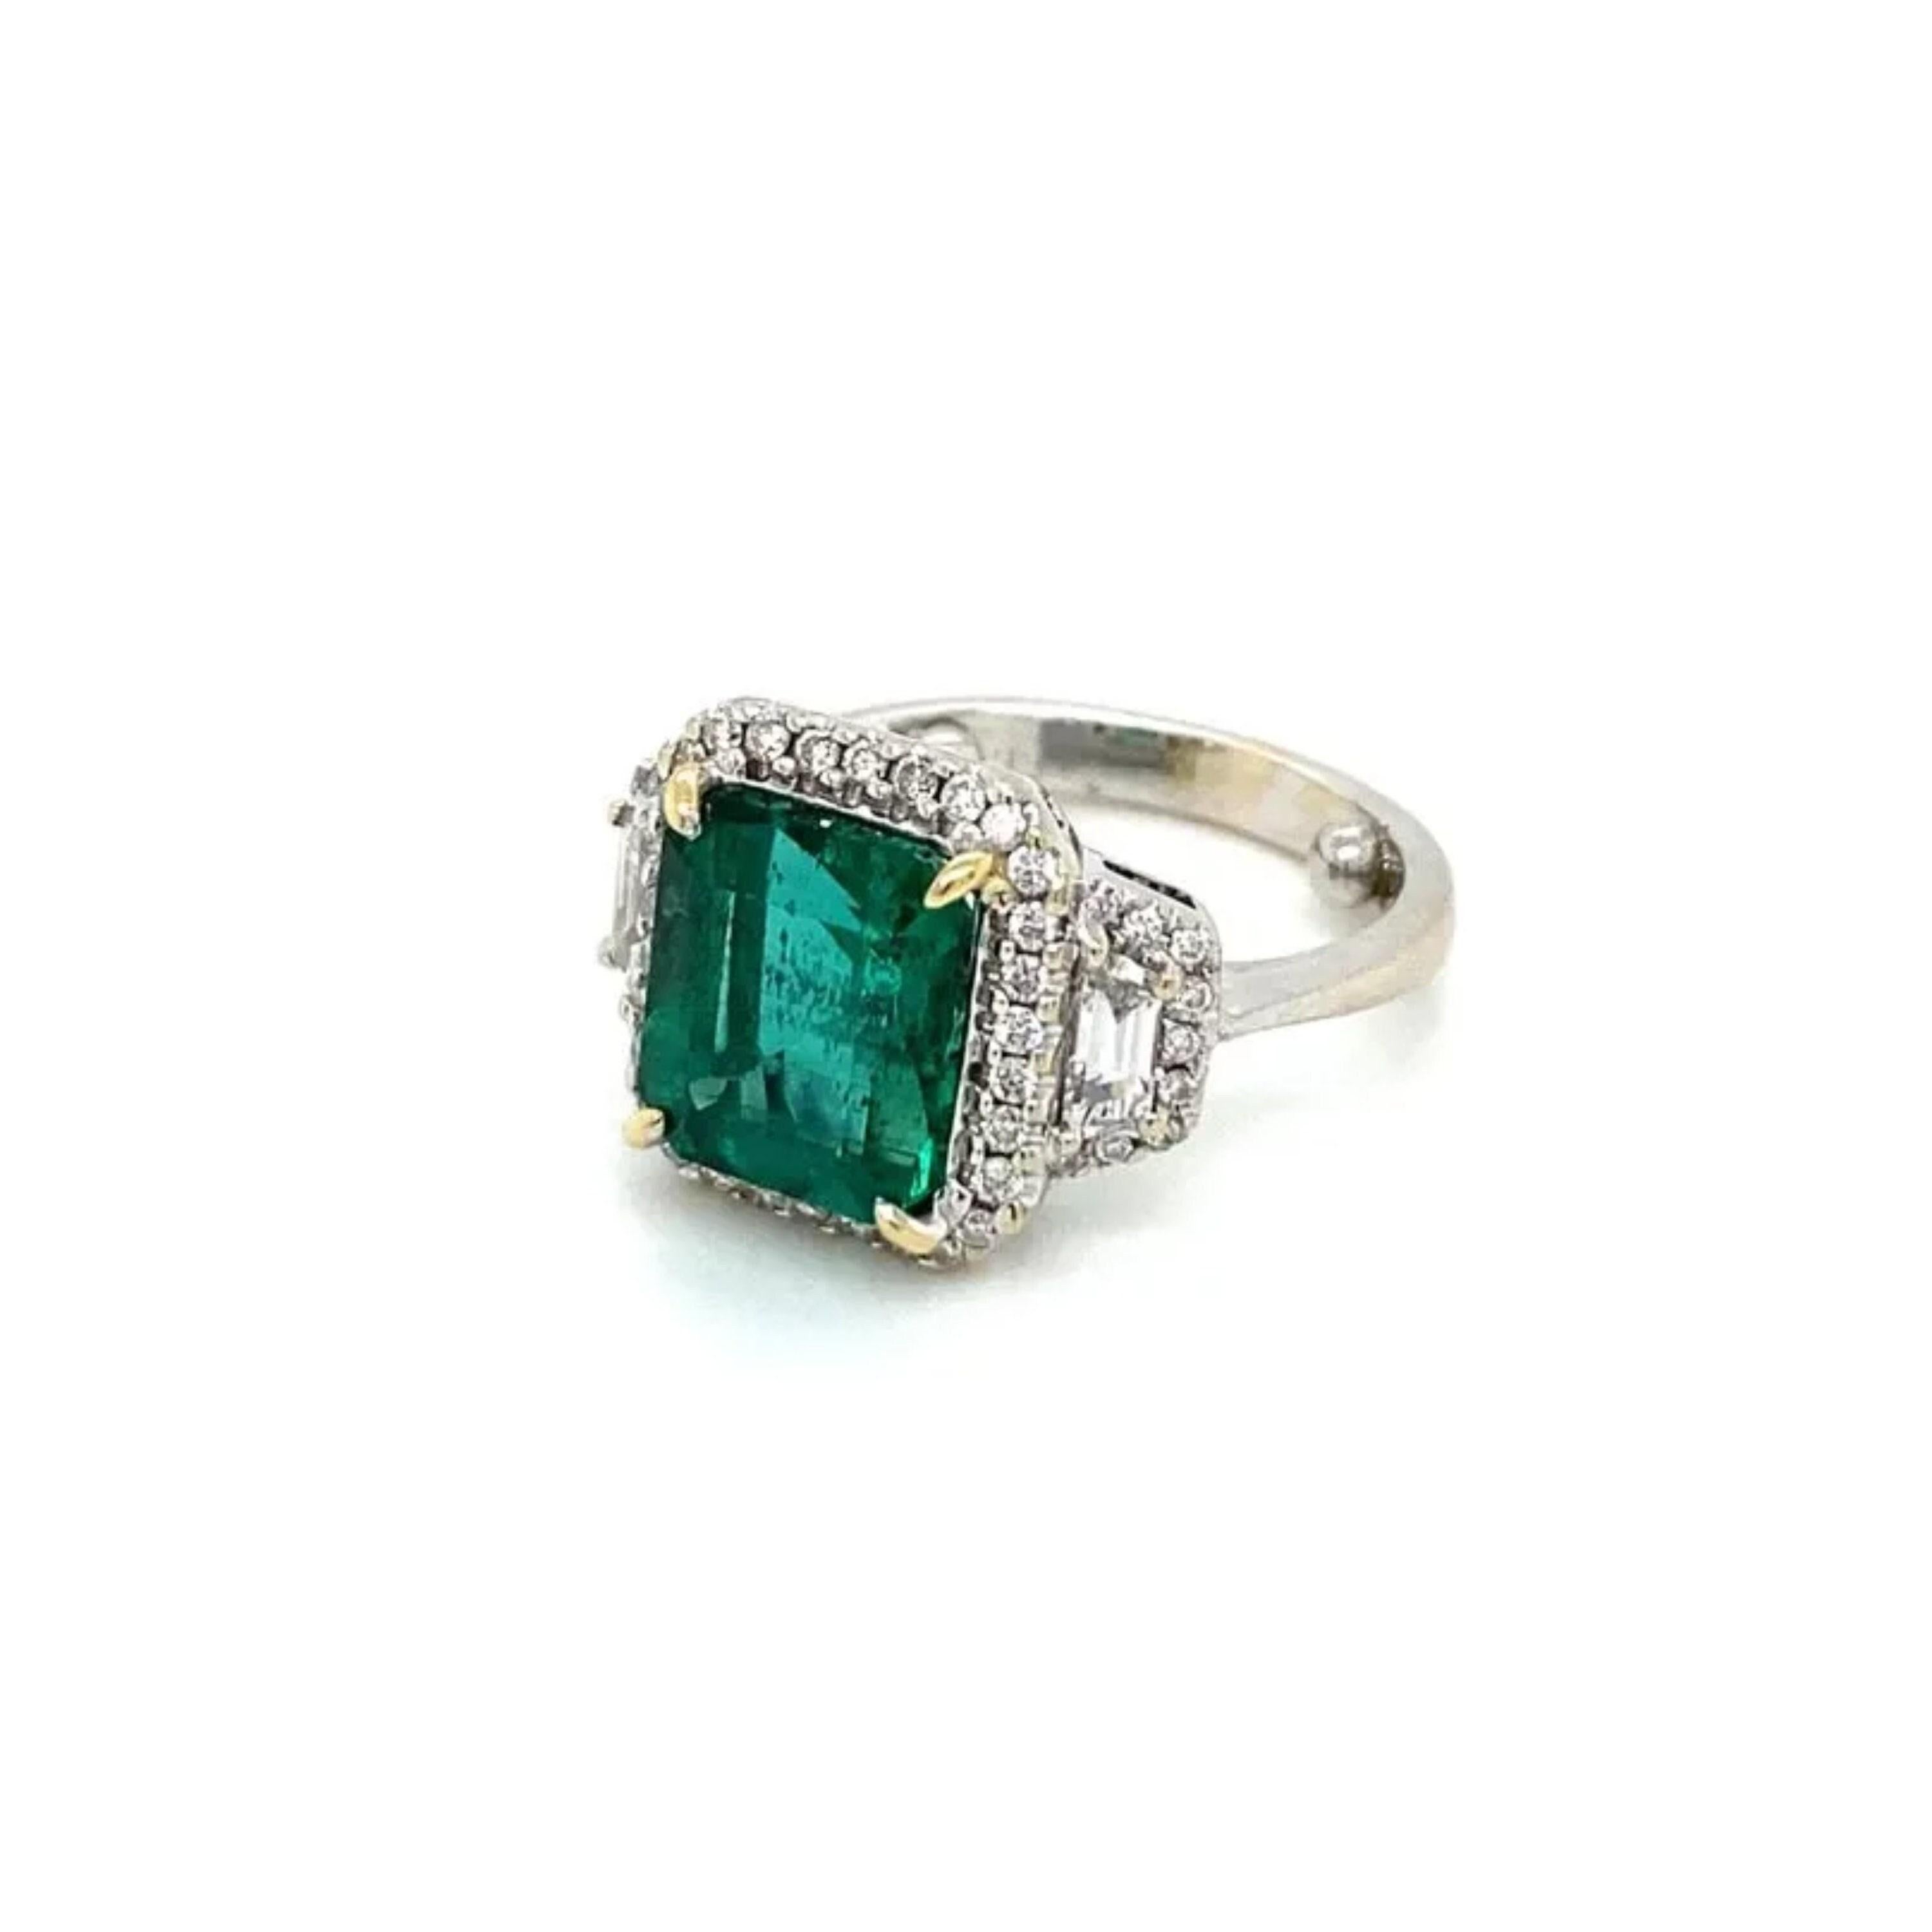 For Sale:  Emerald Engagement Ring, Emerald Cut Emerald Wedding Ring 2